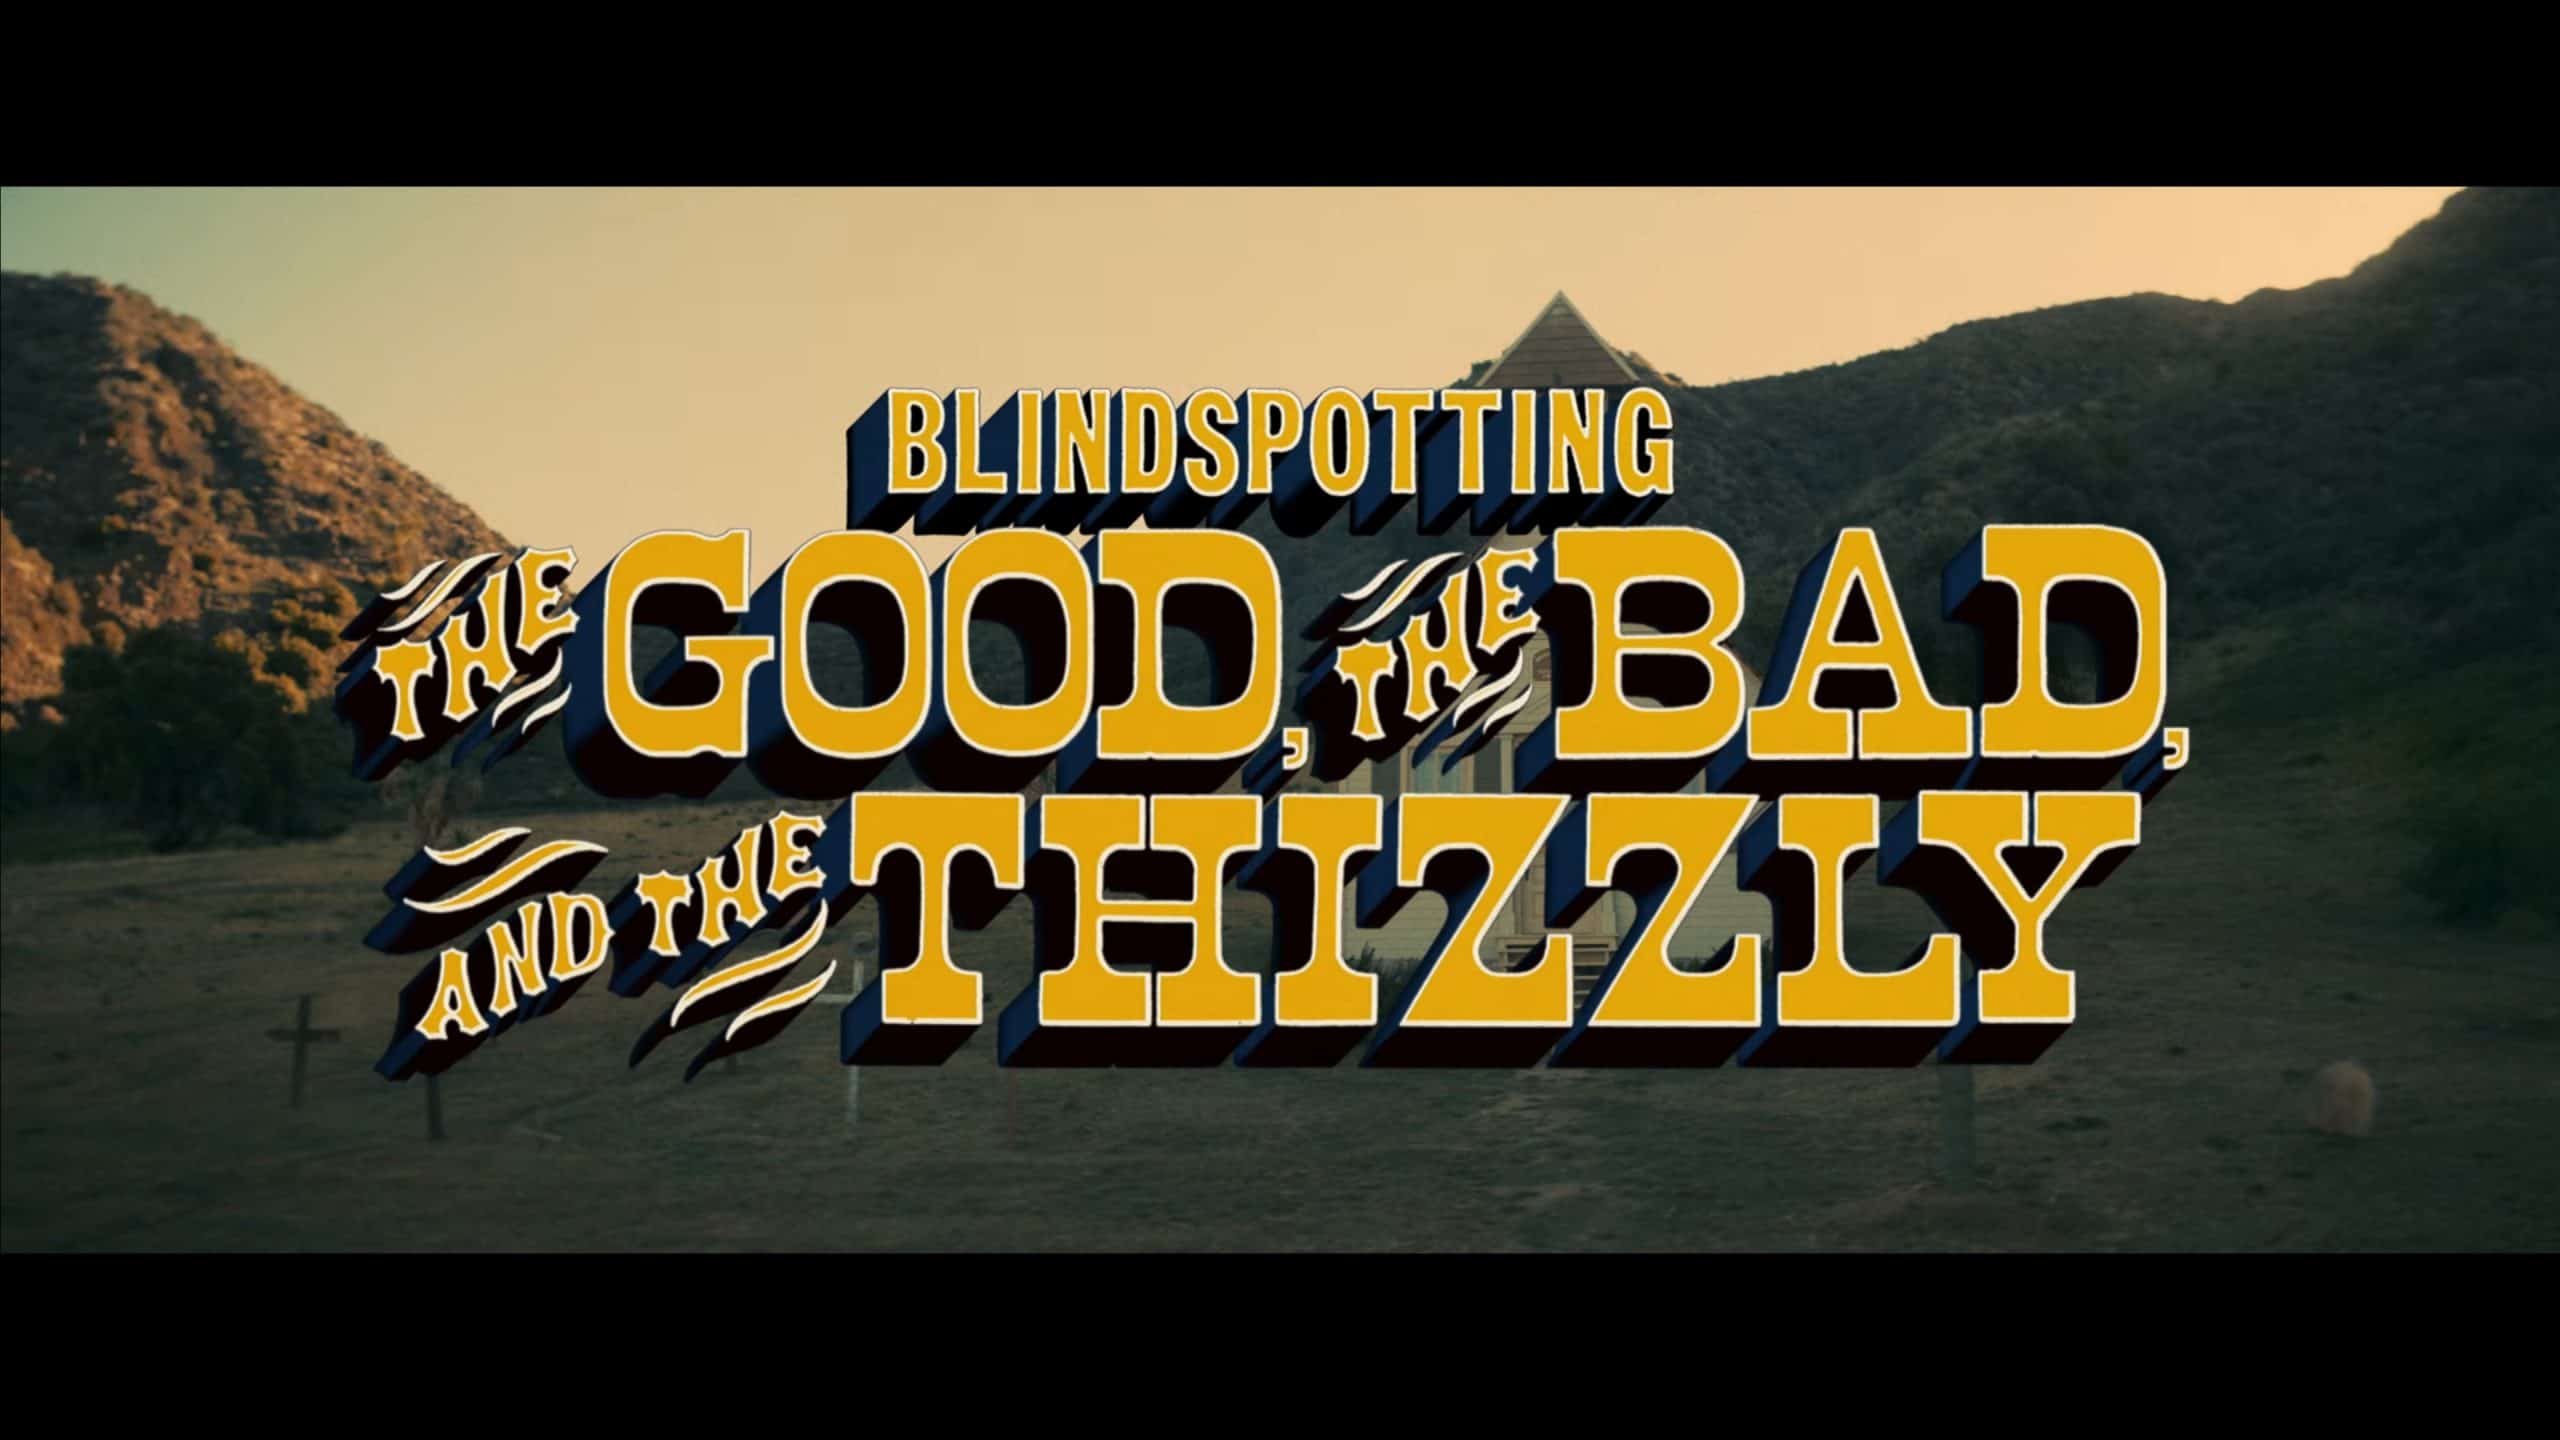 "Title Card," Blindspotting, "The Good, the Bad, and the Thizzly,"